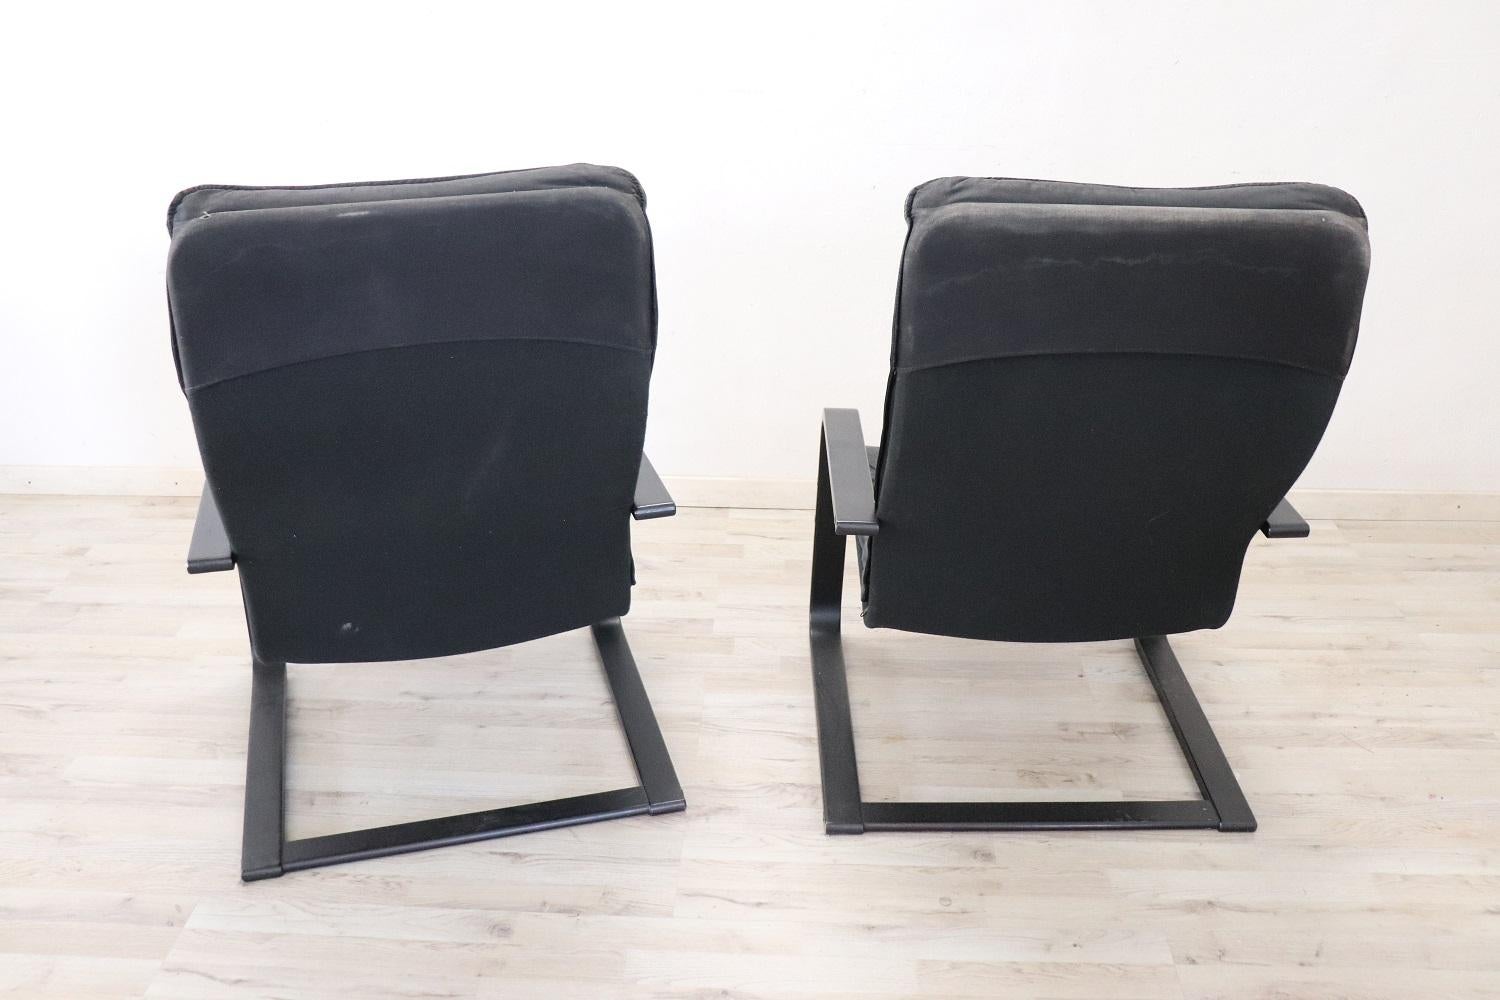 Pair of Lounge Chairs in Black Leather, 1970s For Sale 5